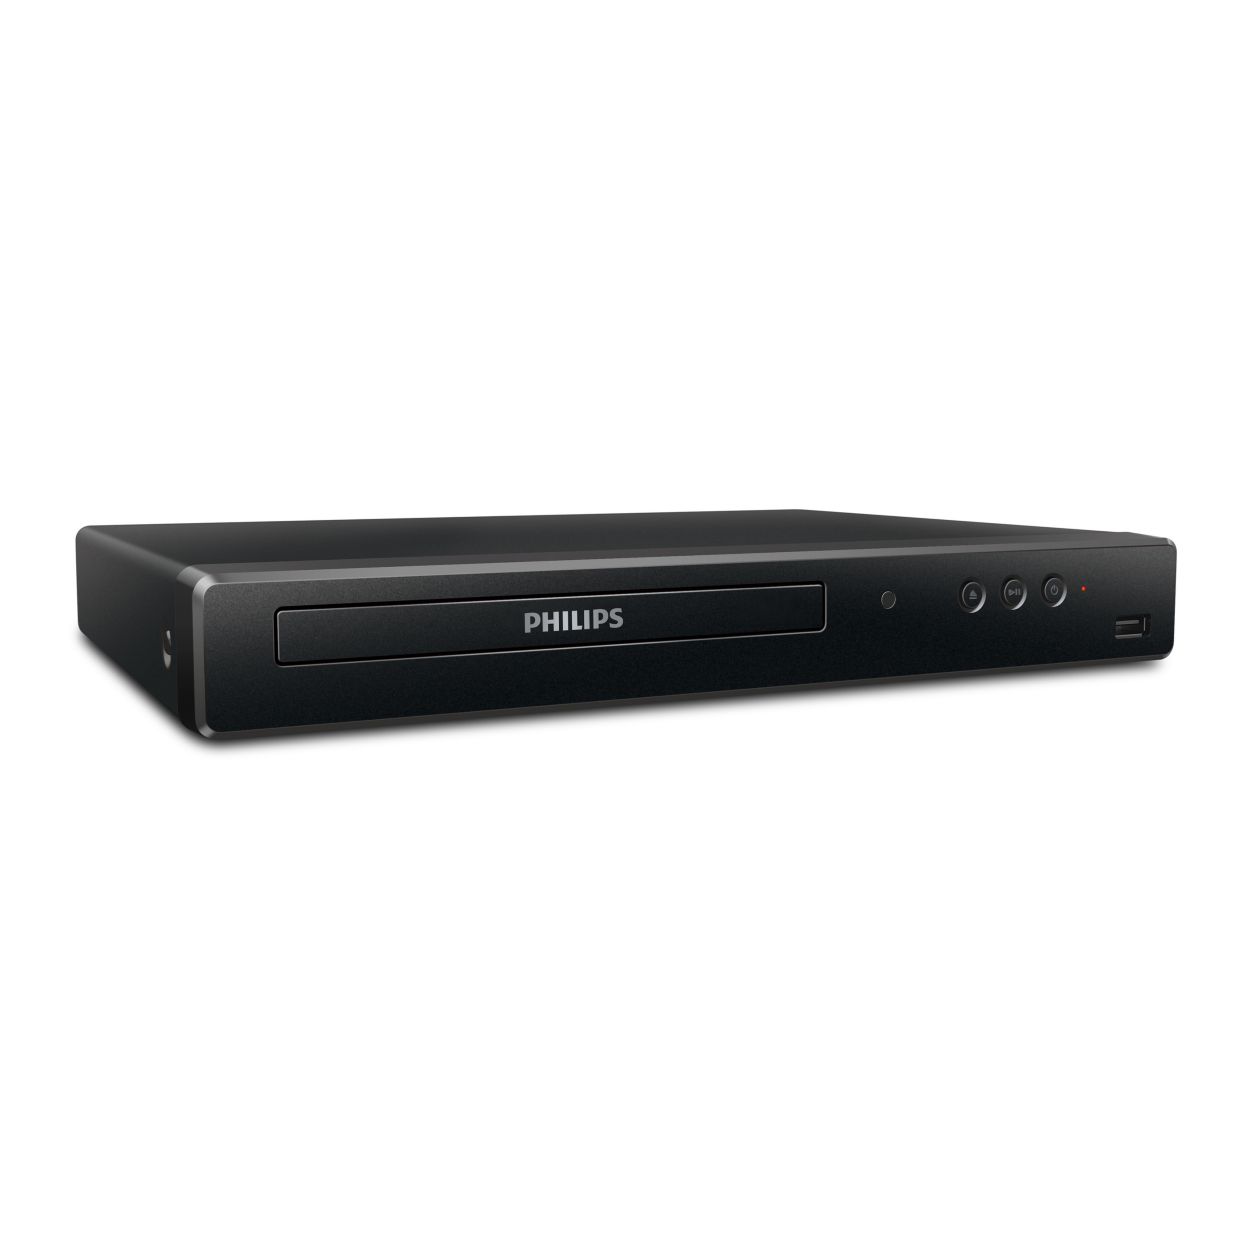 afwijzing Refrein Groen Blu-ray and DVD player BDP1502/F7 | Philips